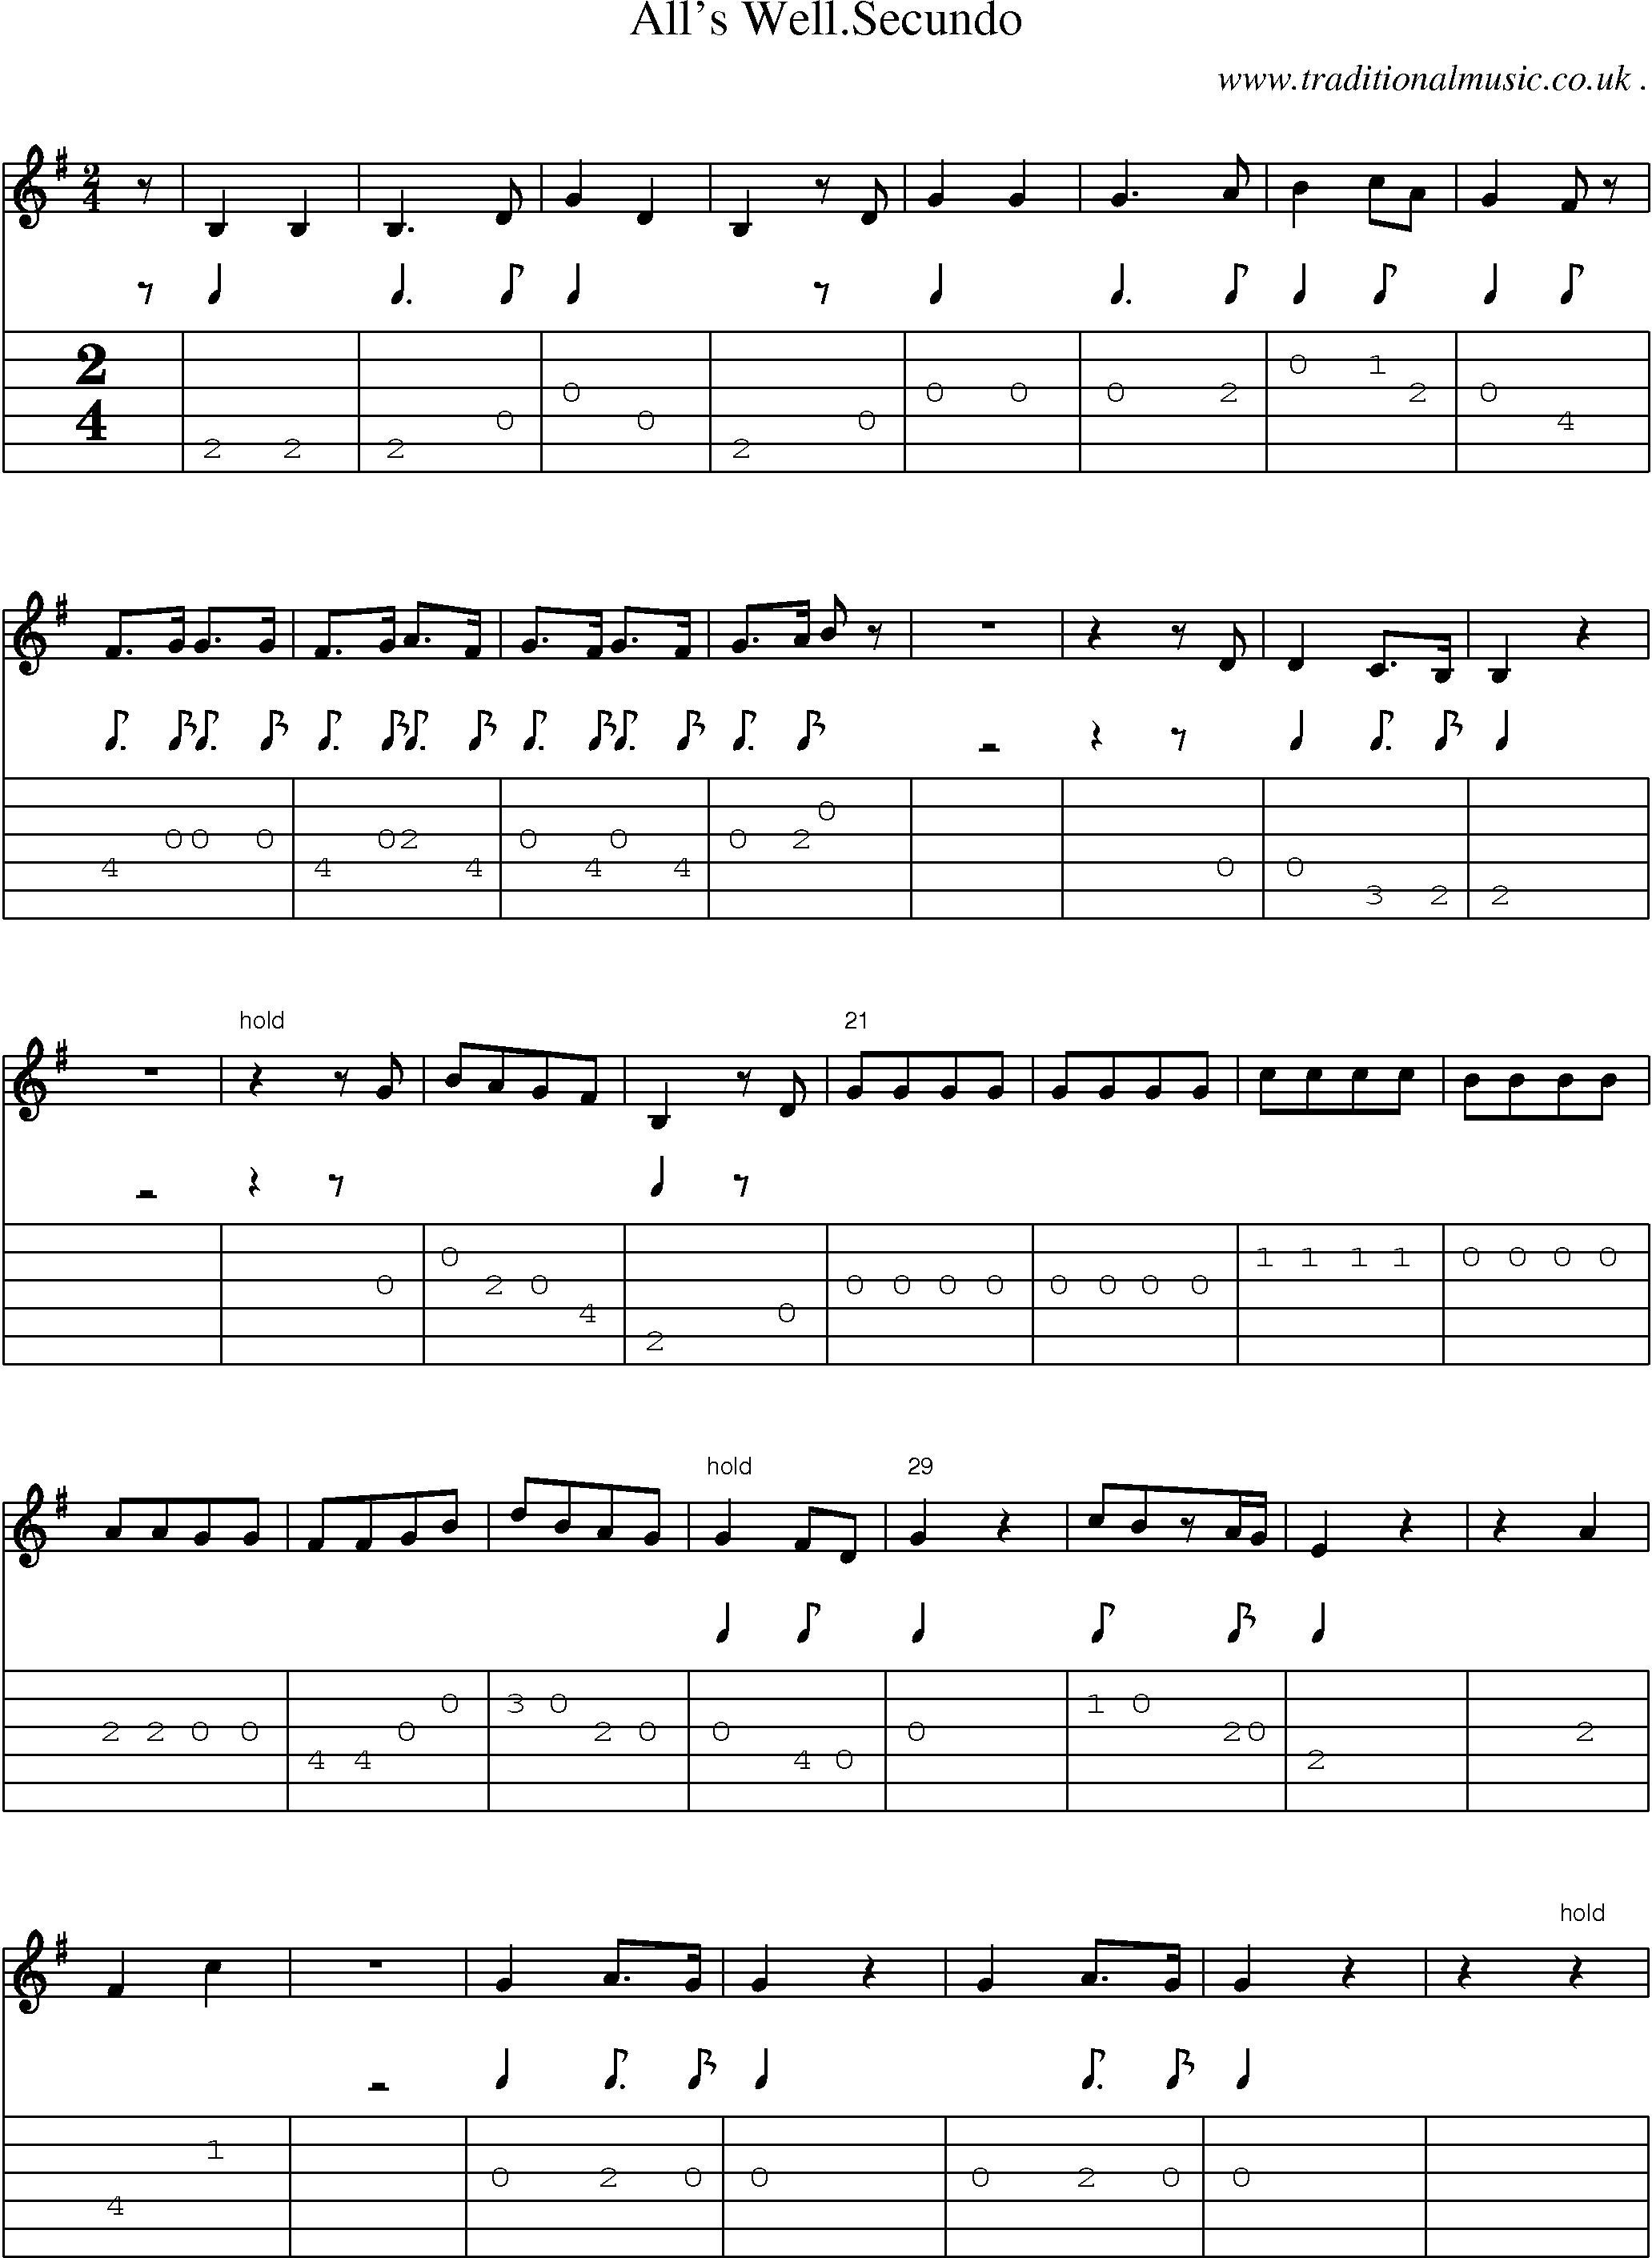 Sheet-Music and Guitar Tabs for Alls Wellsecundo